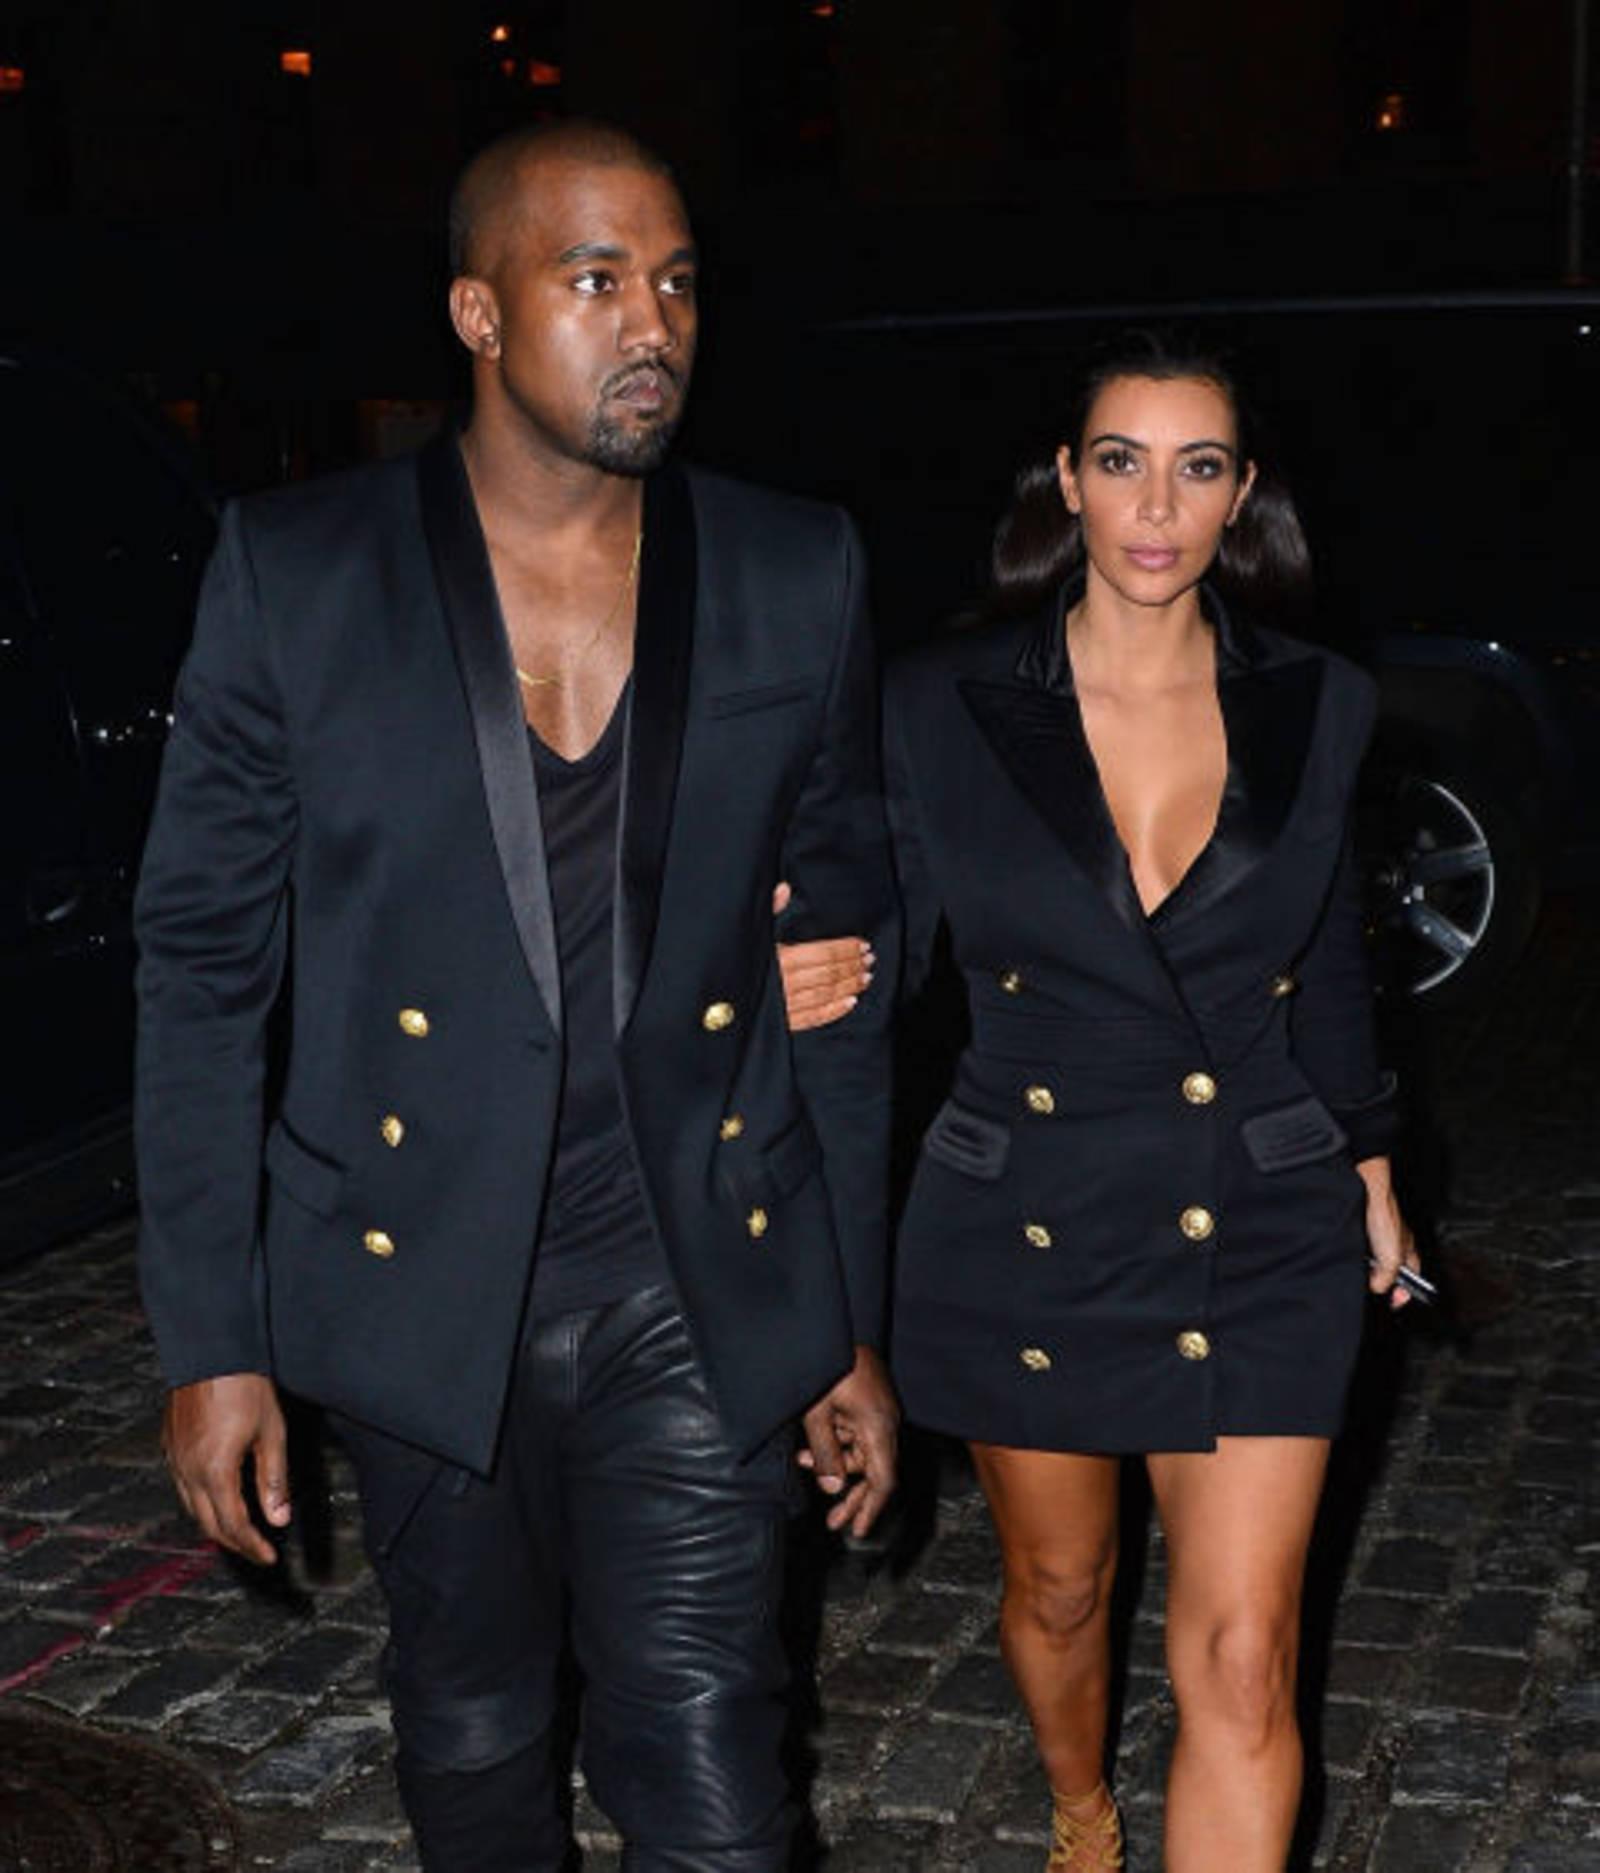 Kim Kardashian and Kanye West Both are looking awesome in black matching outfits!: 